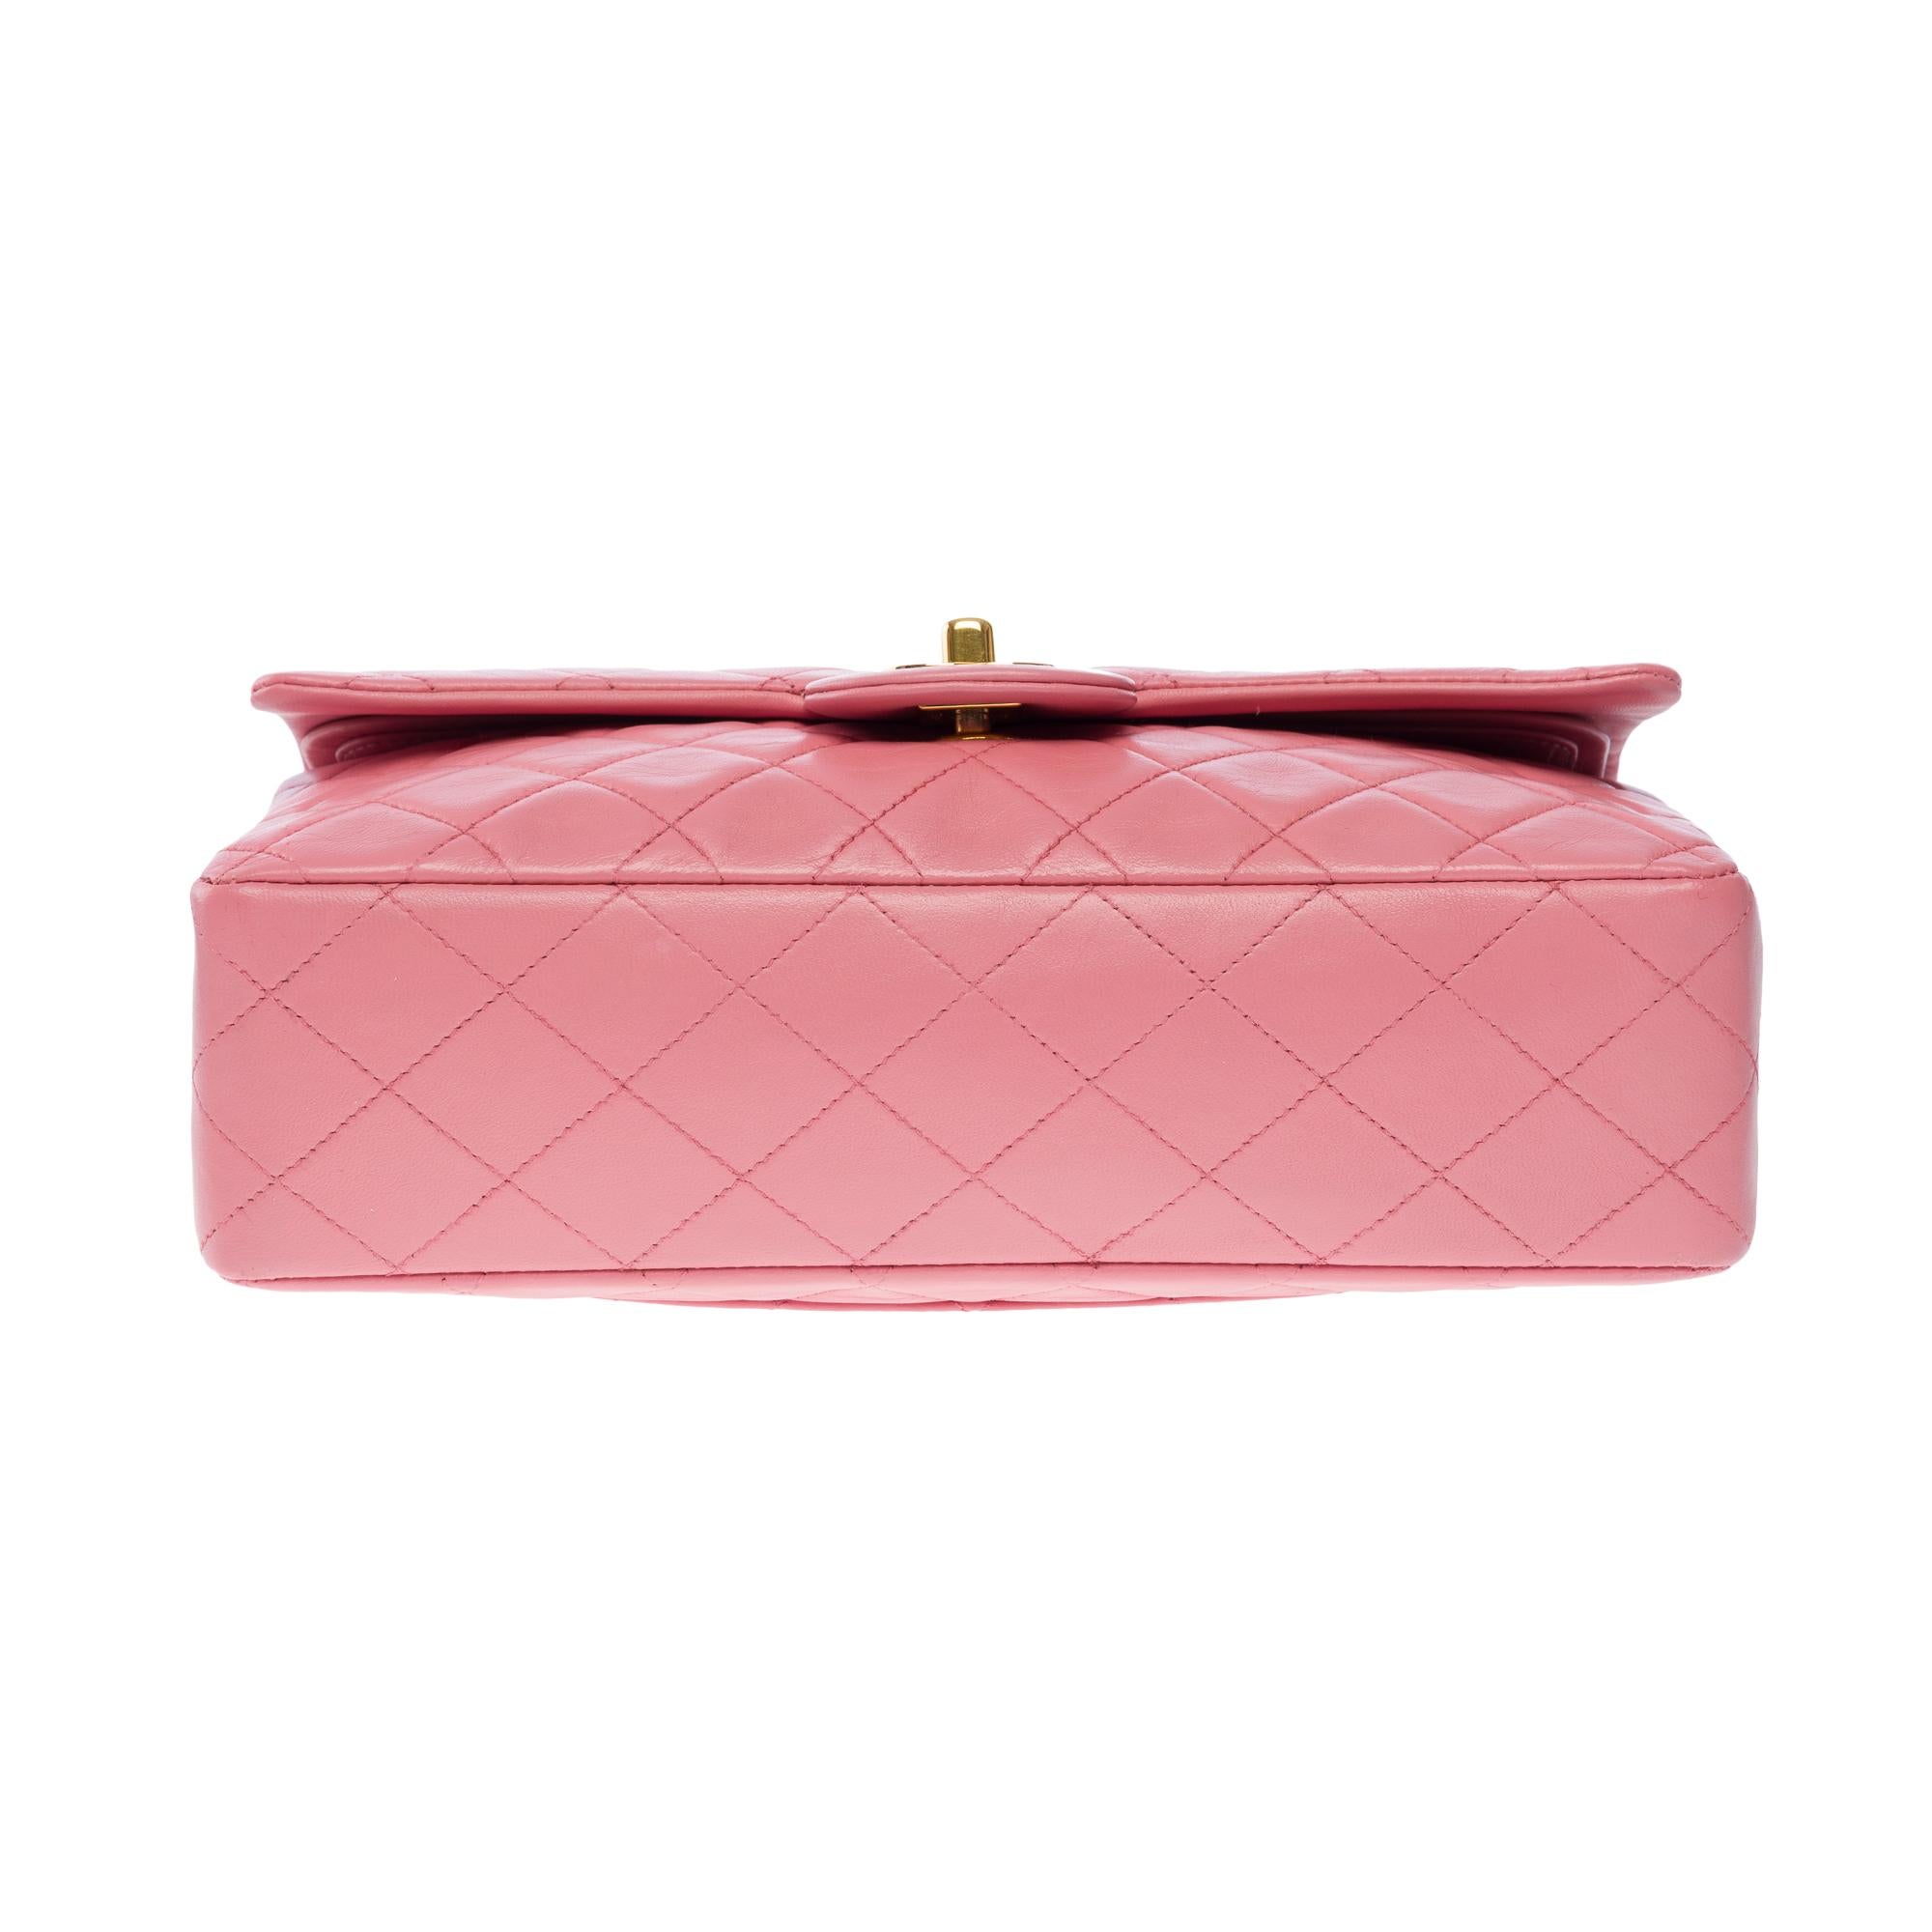 Chanel Timeless Medium double Flap shoulder bag in Pink quilted lambskin, GHW 8